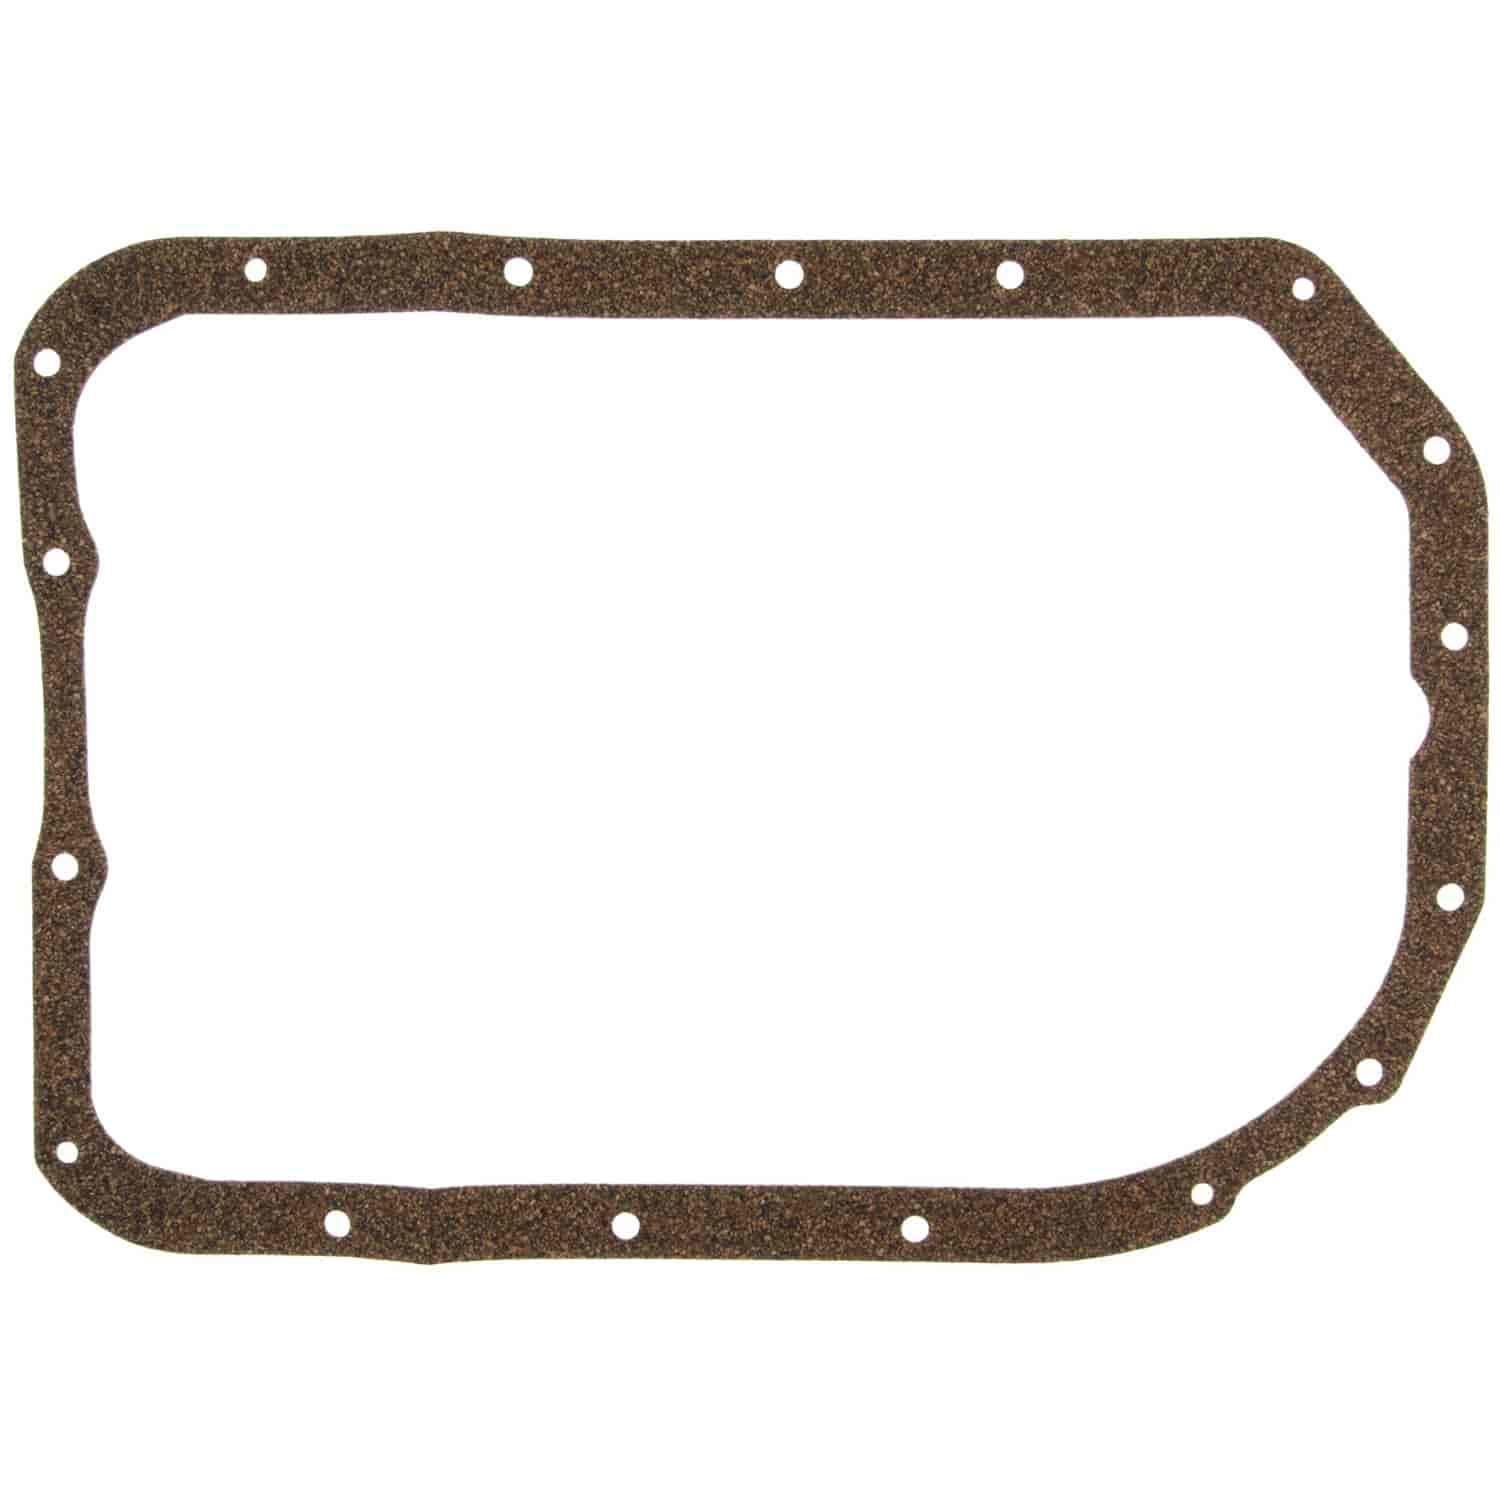 Automatic Transmission Gasket 1991-2009 GM 4L80E in Cork-Rubber